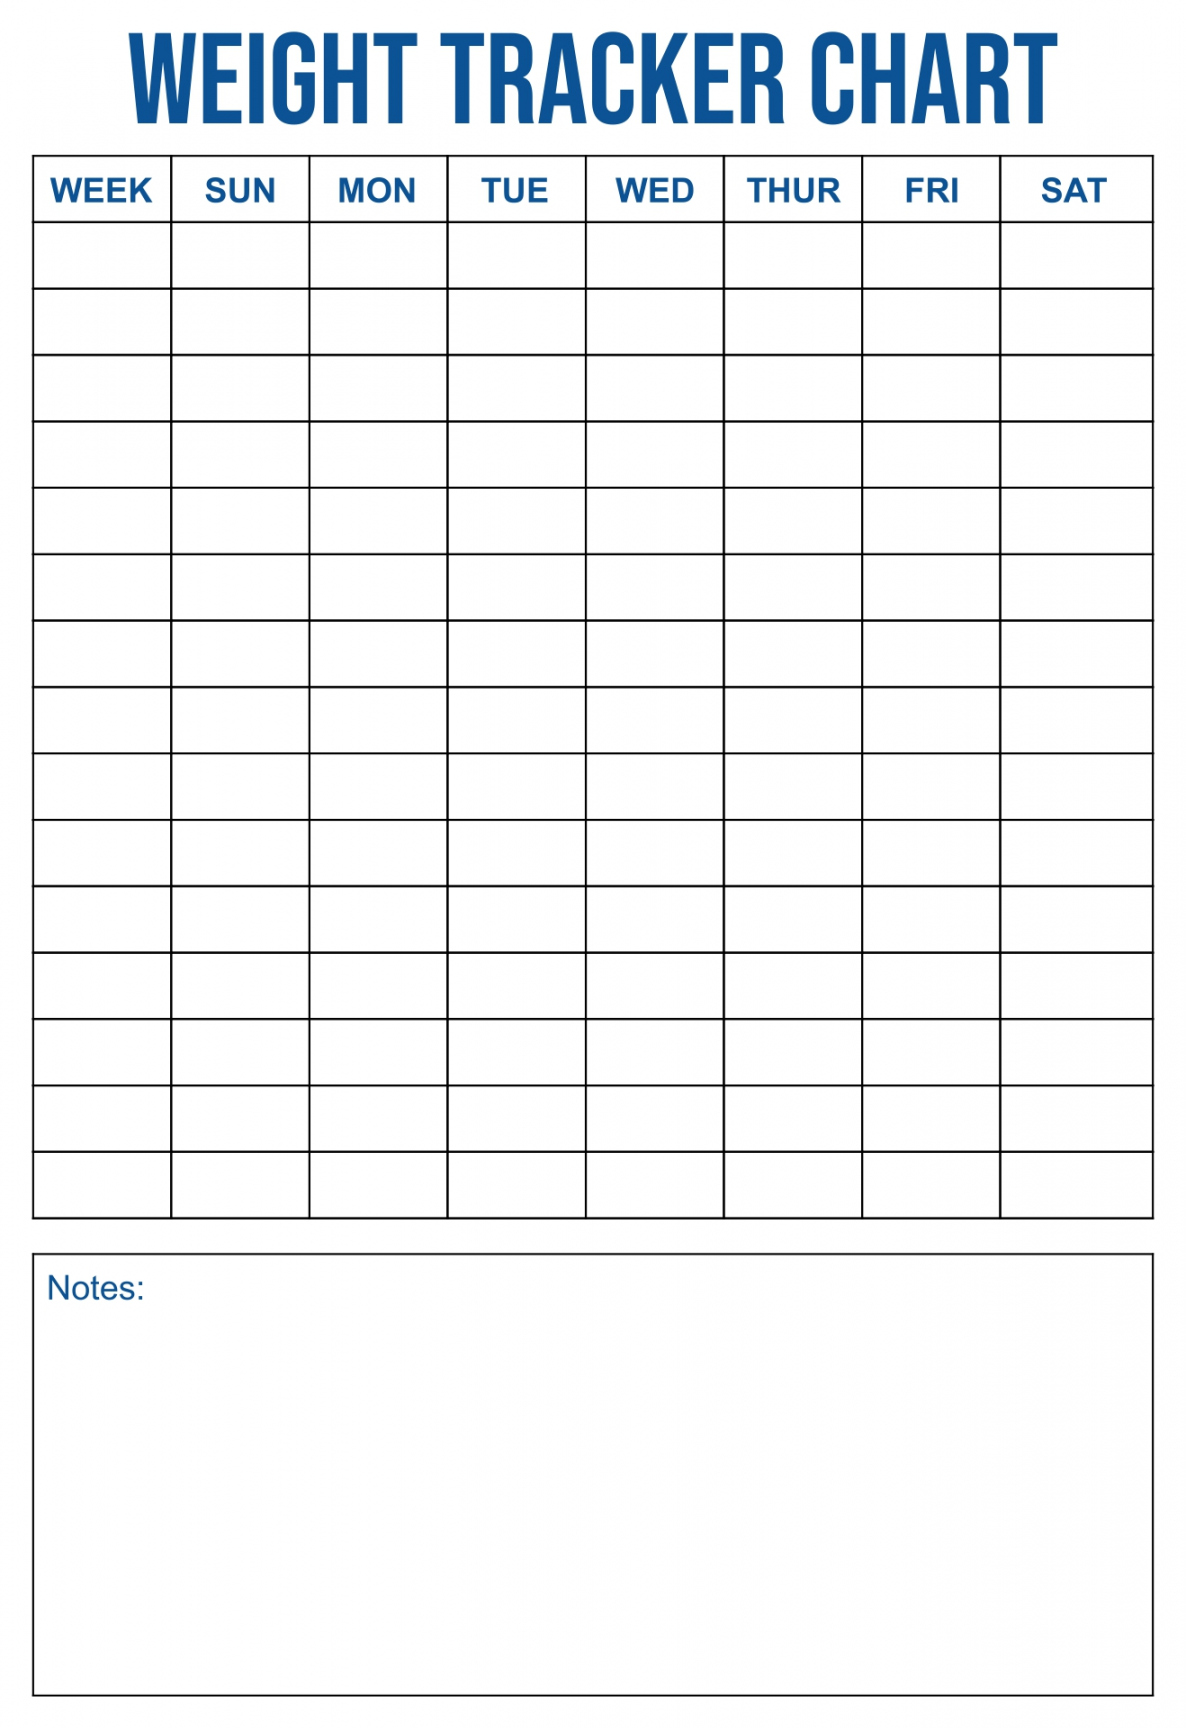 Best Free Printable Weight Loss Tracker - printablee - Free Printable Weight Loss Chart